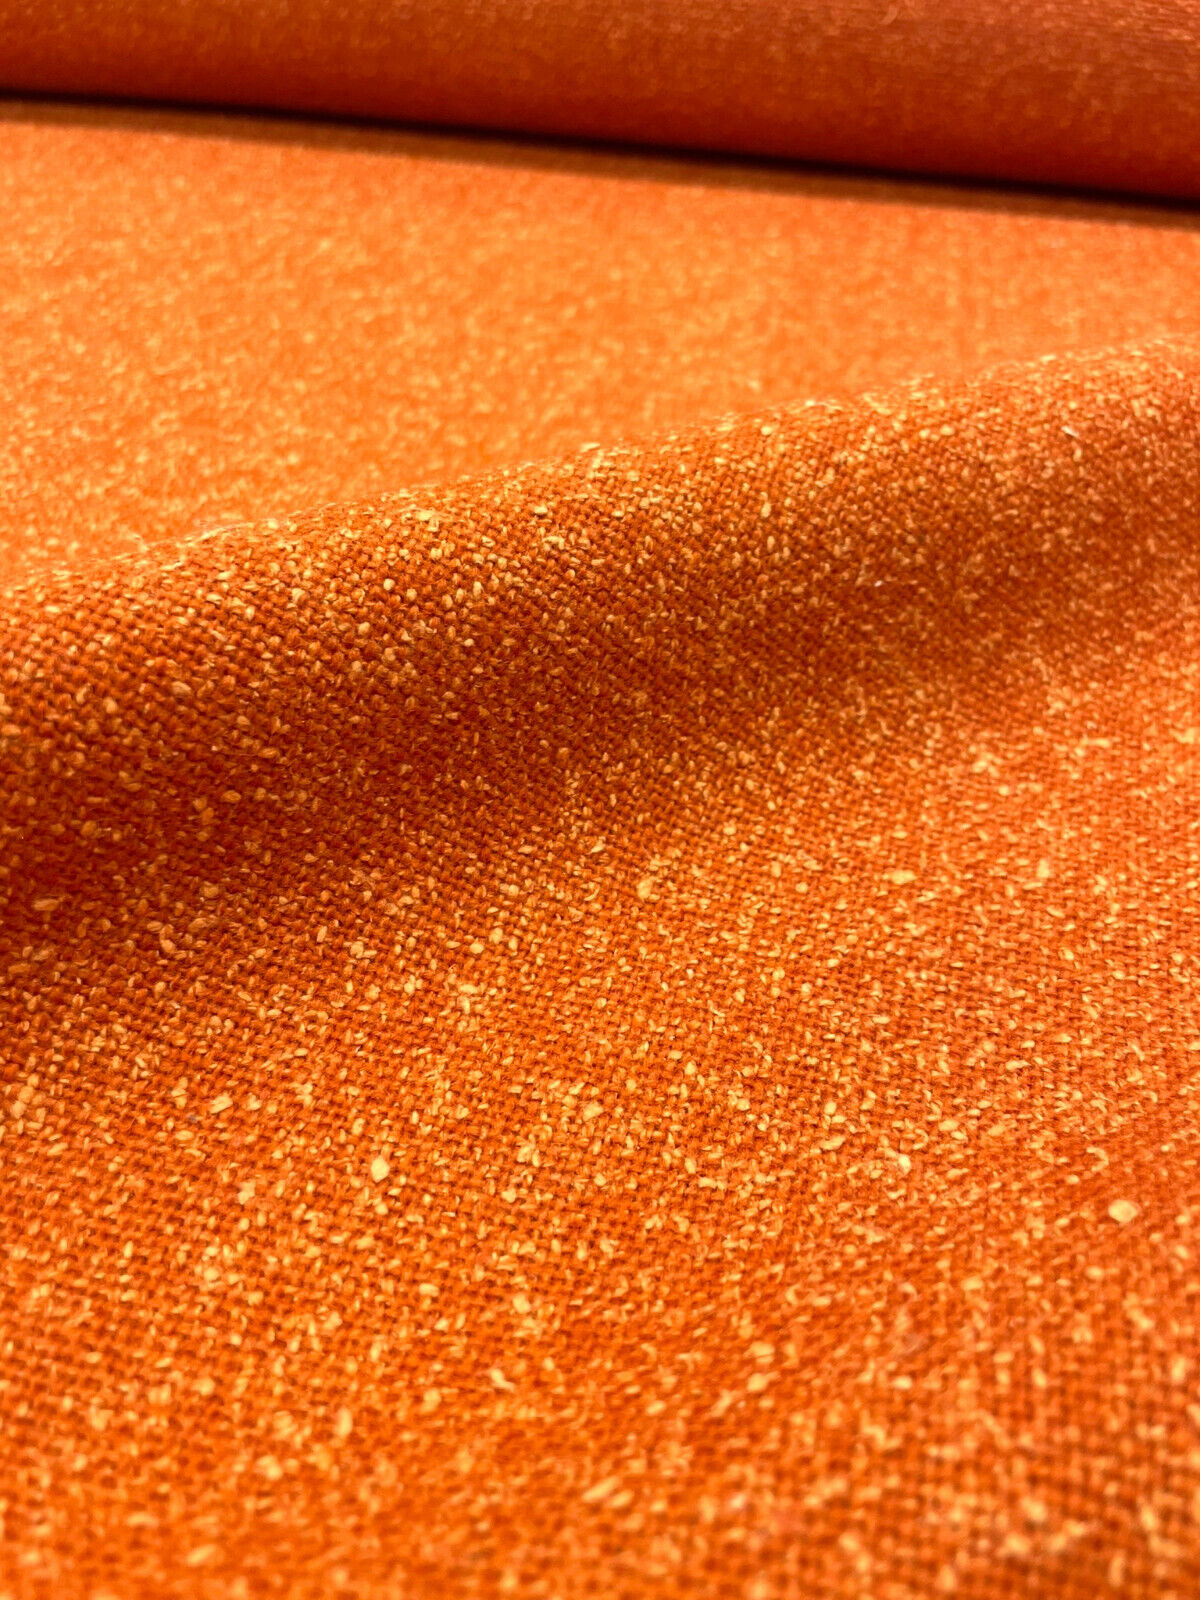 2.625 yards Bright Orange Rustic Woven Wool Blend Upholstery Fabric